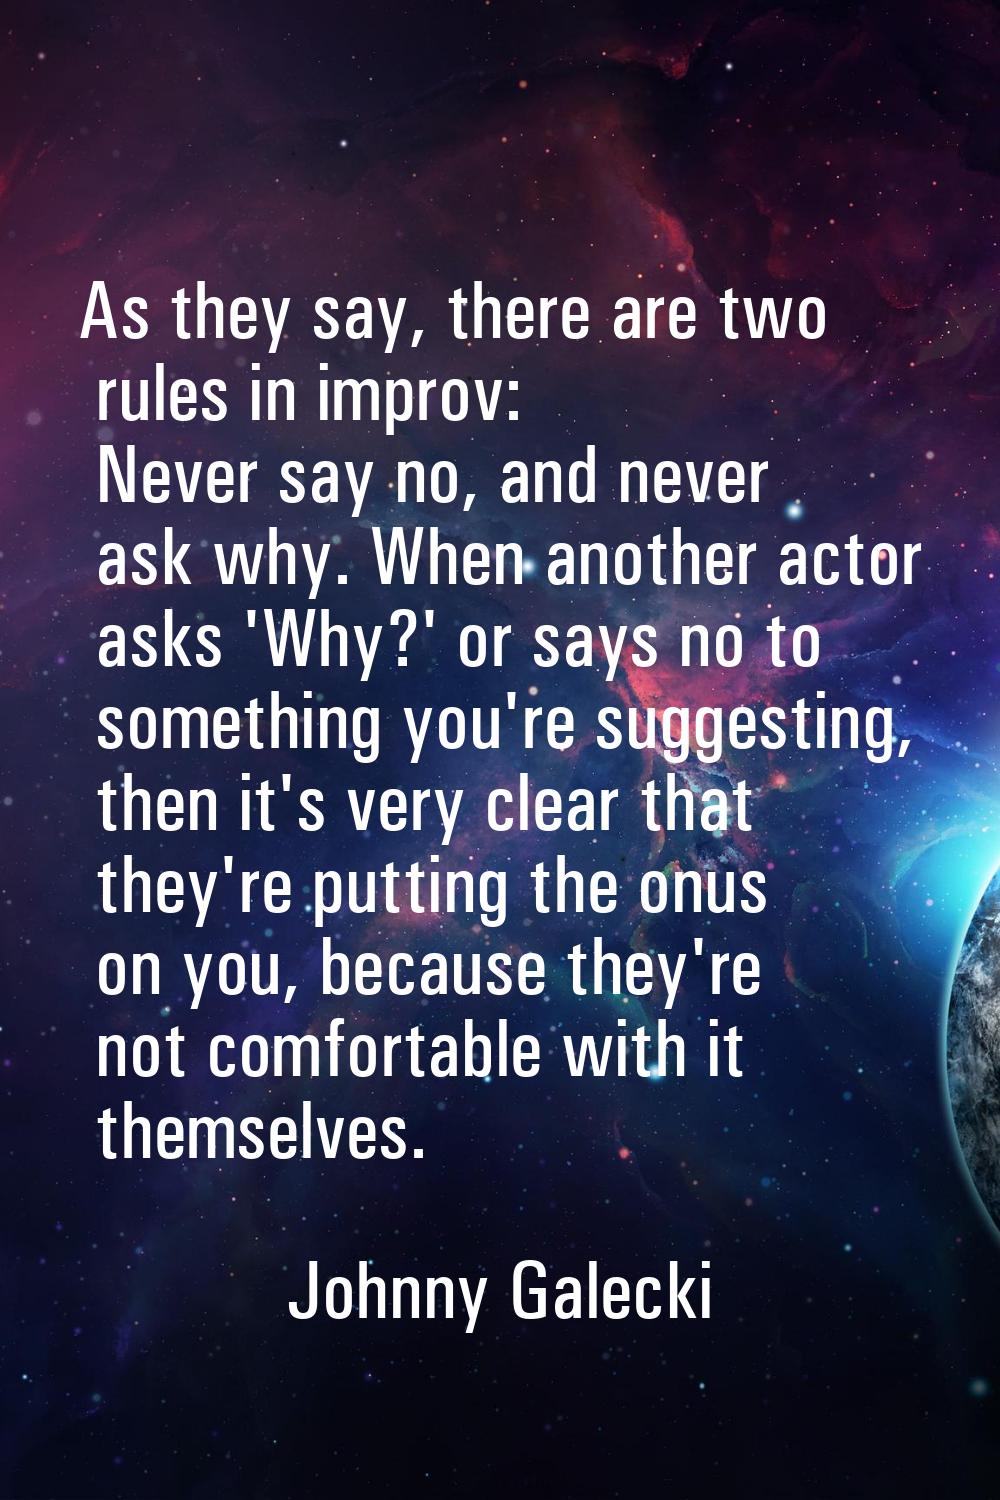 As they say, there are two rules in improv: Never say no, and never ask why. When another actor ask